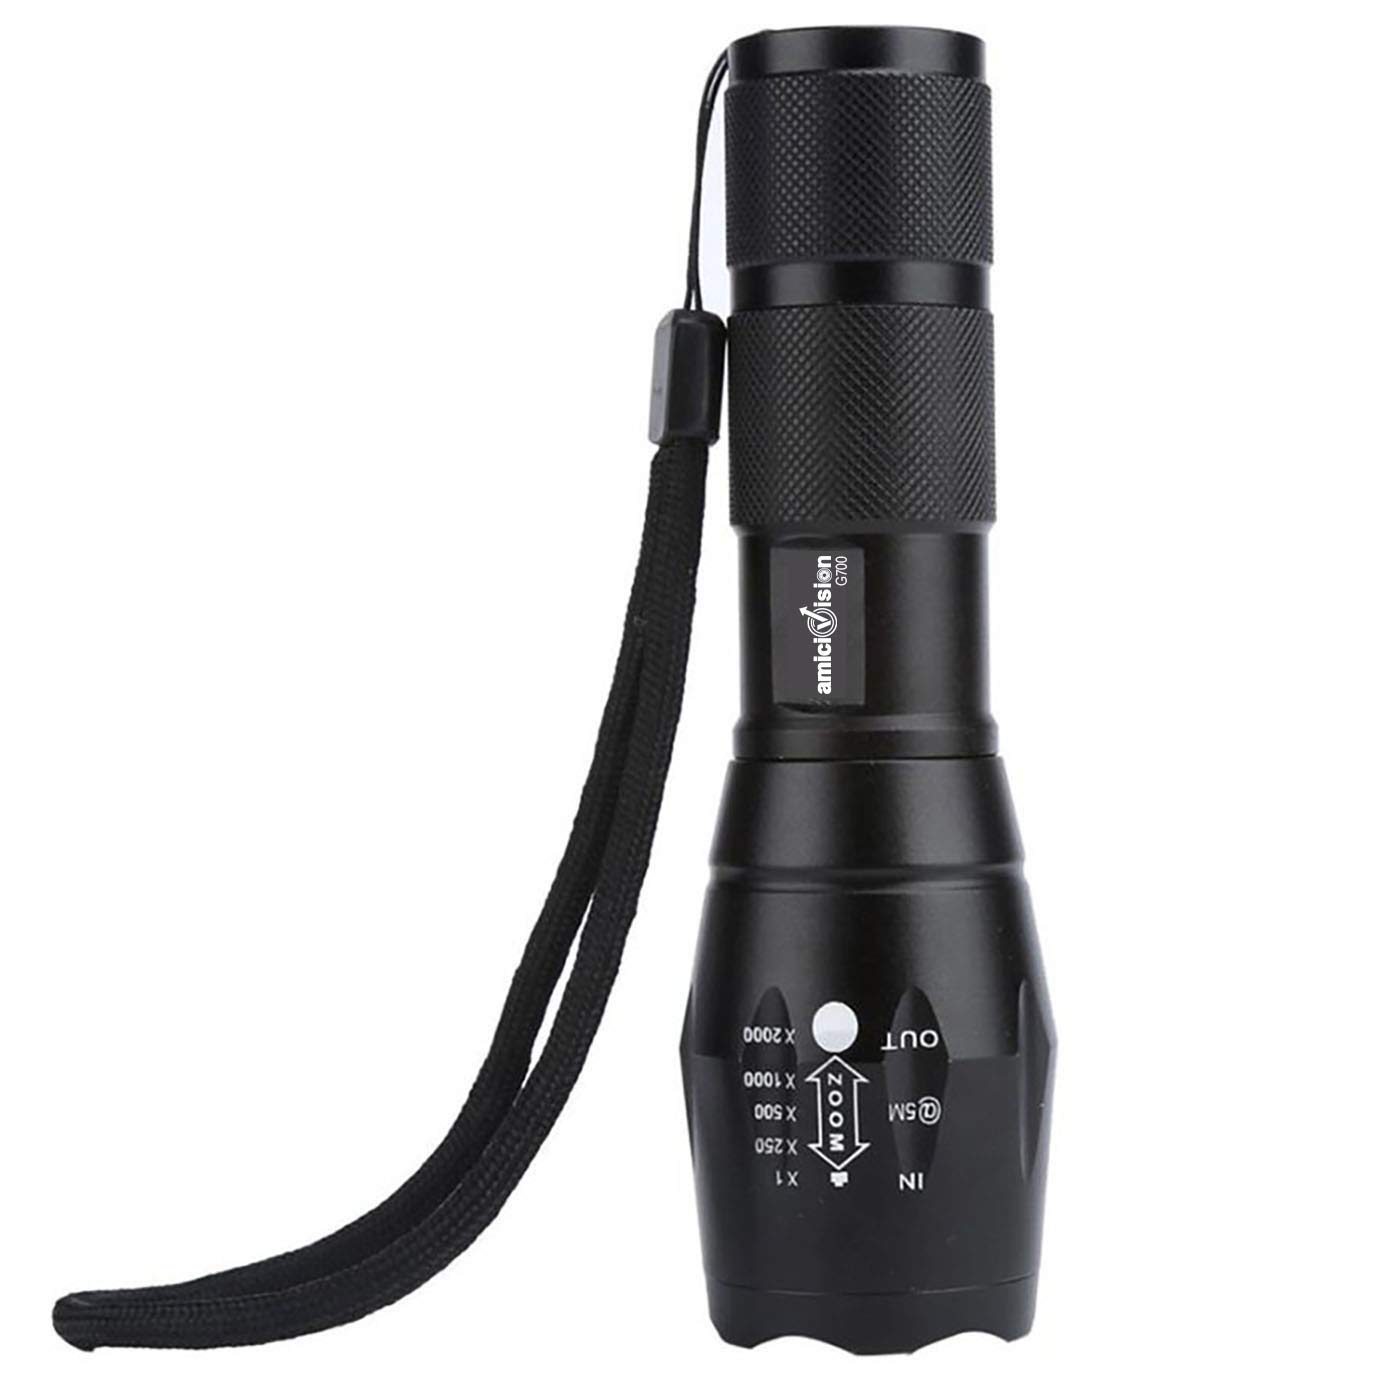 G700 Metal LED Torch Flashlight XML T6 (with AAA Battery and Lens Heads)